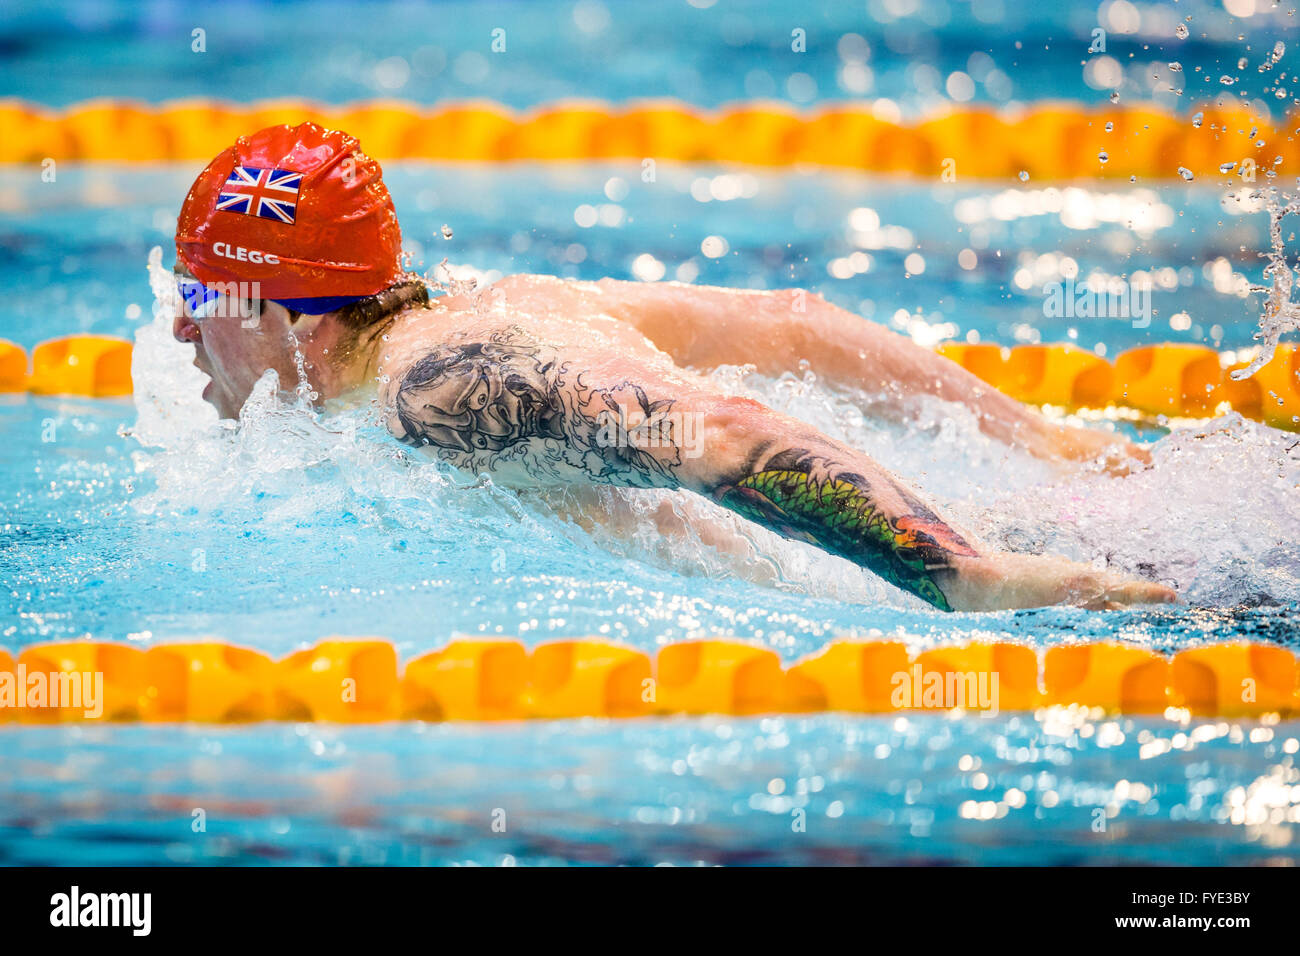 GLASGOW, UK: April, 25, 2016 James Clegg competes at the Para-swimming trials. Stock Photo